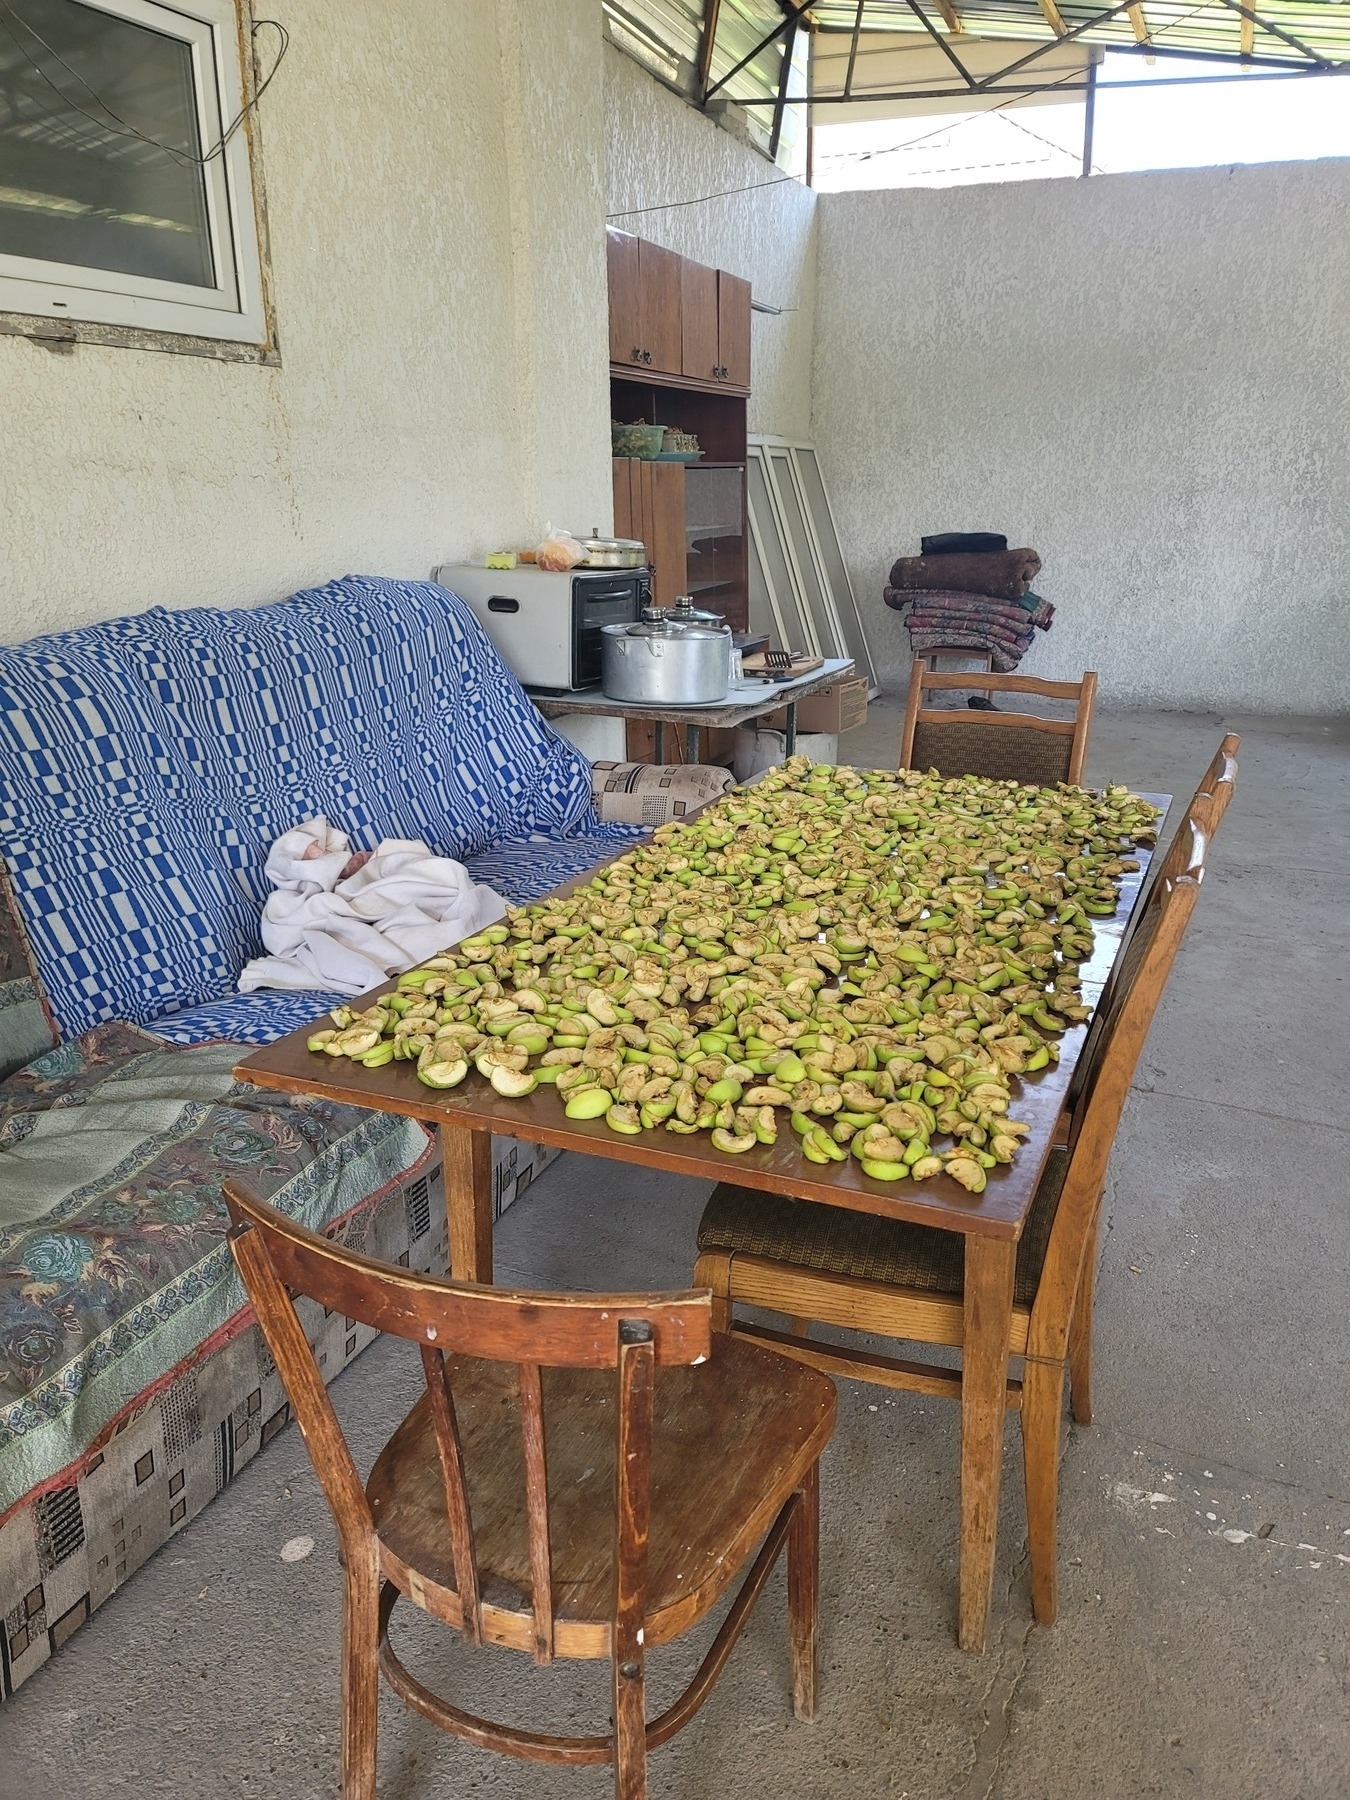 green apple slices on a wooden table in an enclosed concrete porch area